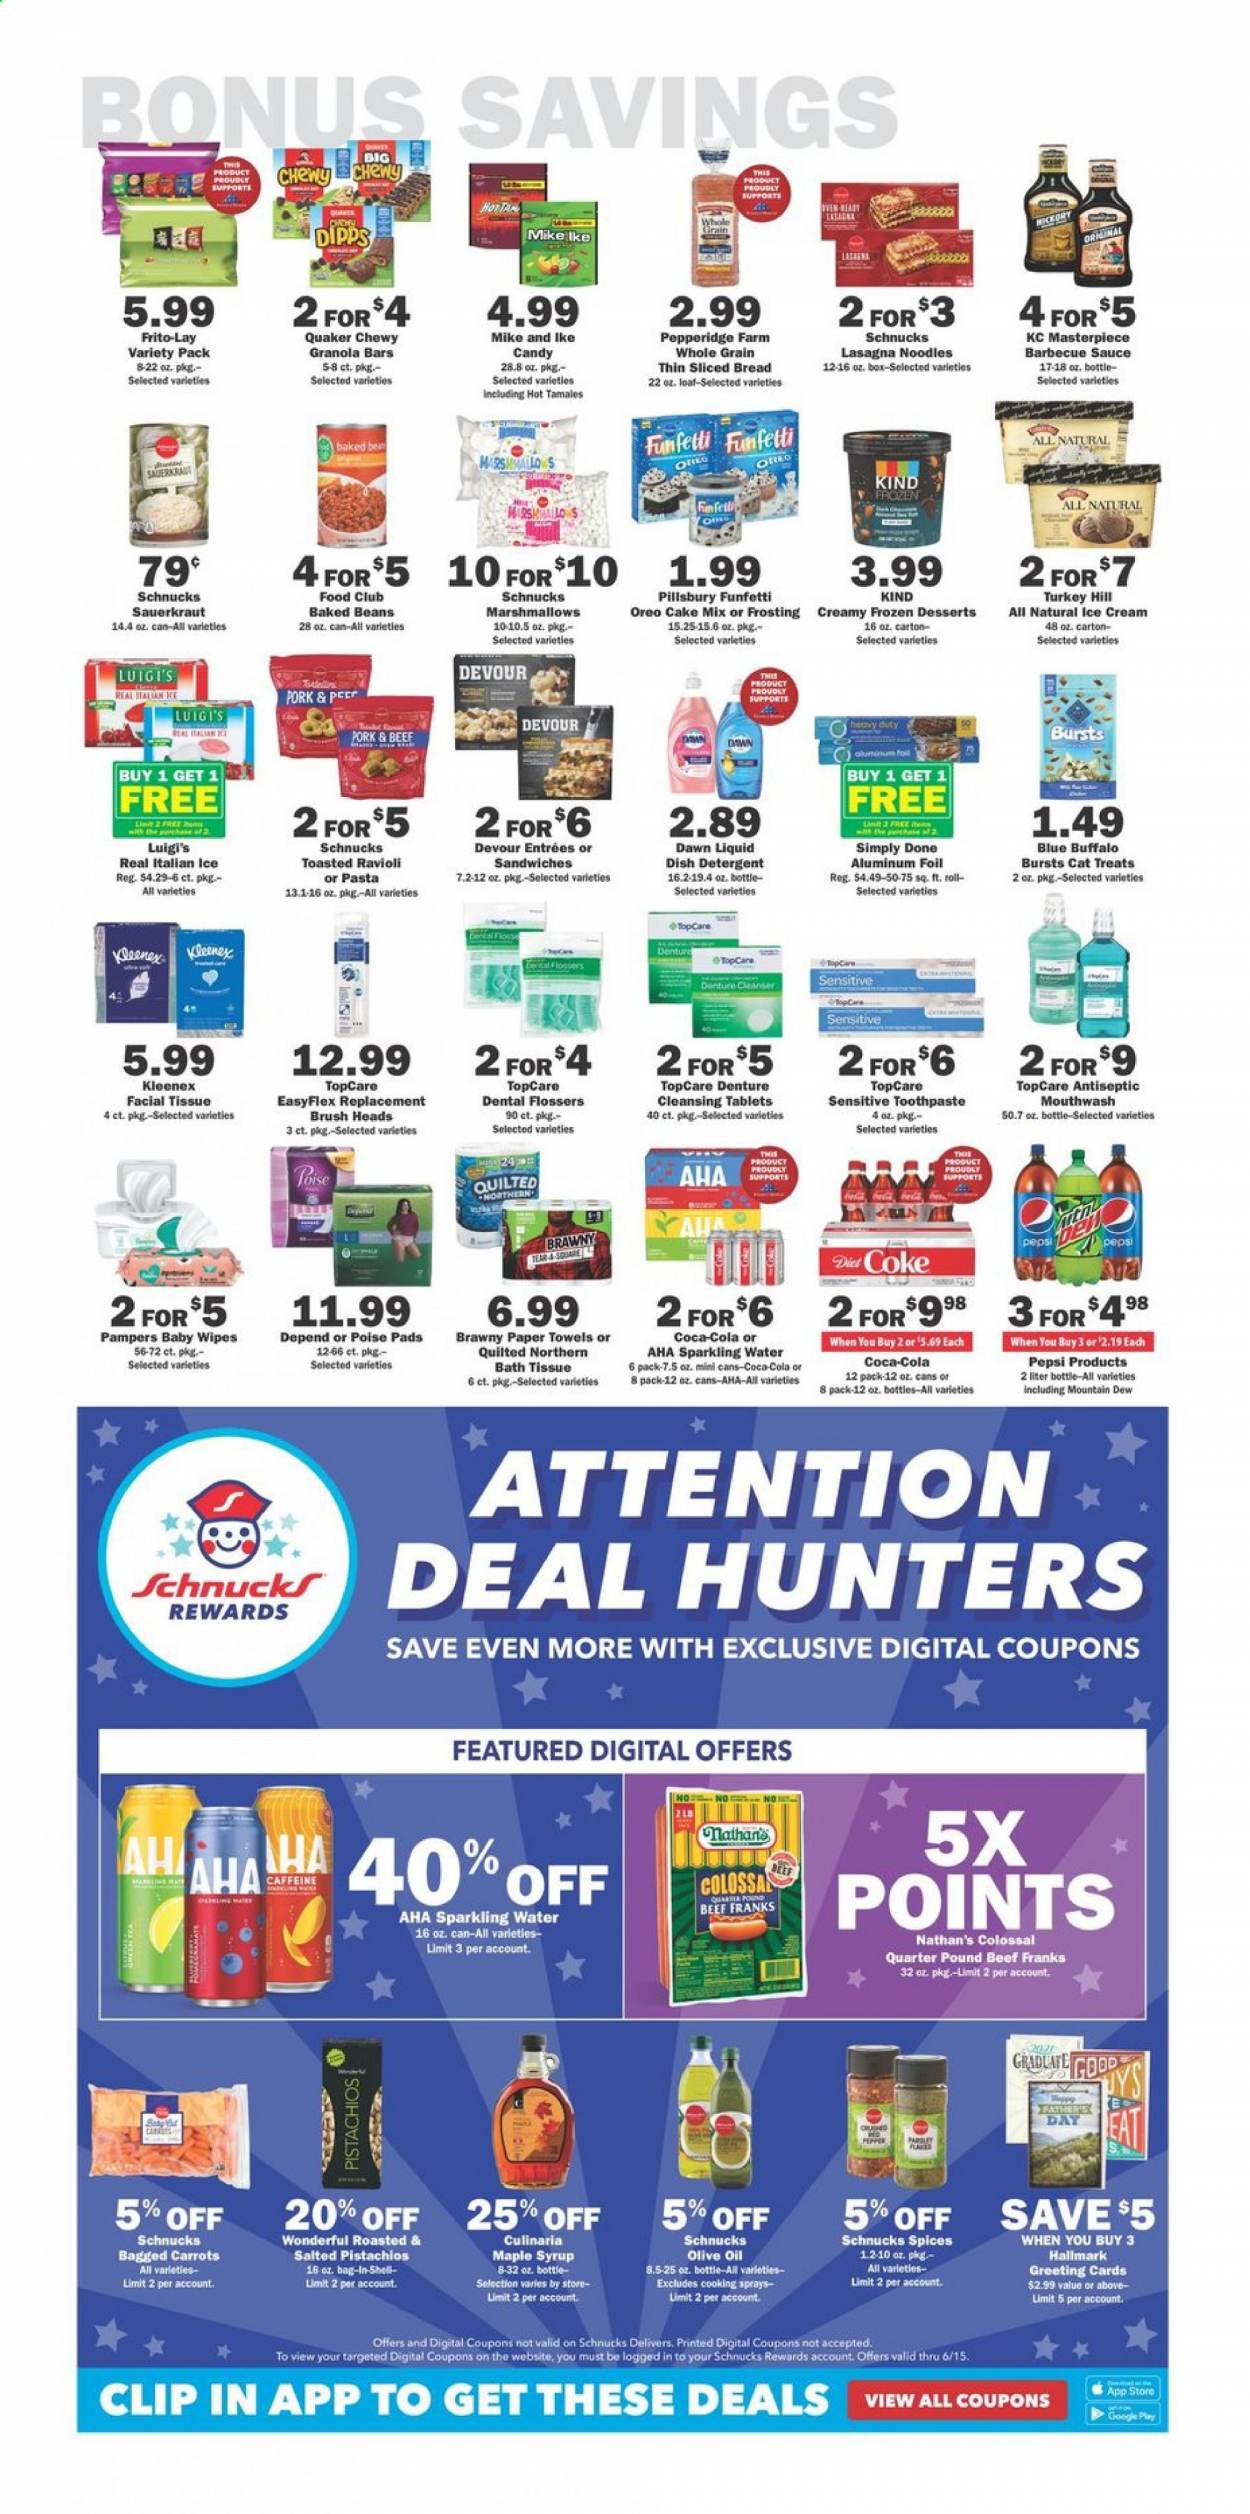 thumbnail - Schnucks Flyer - 06/09/2021 - 06/15/2021 - Sales products - bread, cake mix, beans, carrots, ravioli, sandwich, sauce, Pillsbury, Quaker, noodles, lasagna meal, Oreo, Devour, marshmallows, Frito-Lay, frosting, sauerkraut, baked beans, granola bar, BBQ sauce, olive oil, maple syrup, syrup, pistachios, Coca-Cola, Mountain Dew, Pepsi, Diet Coke, sparkling water, wipes, Pampers, baby wipes, bath tissue, Kleenex, Quilted Northern, kitchen towels, paper towels, detergent, toothpaste, mouthwash, Blue Buffalo. Page 5.